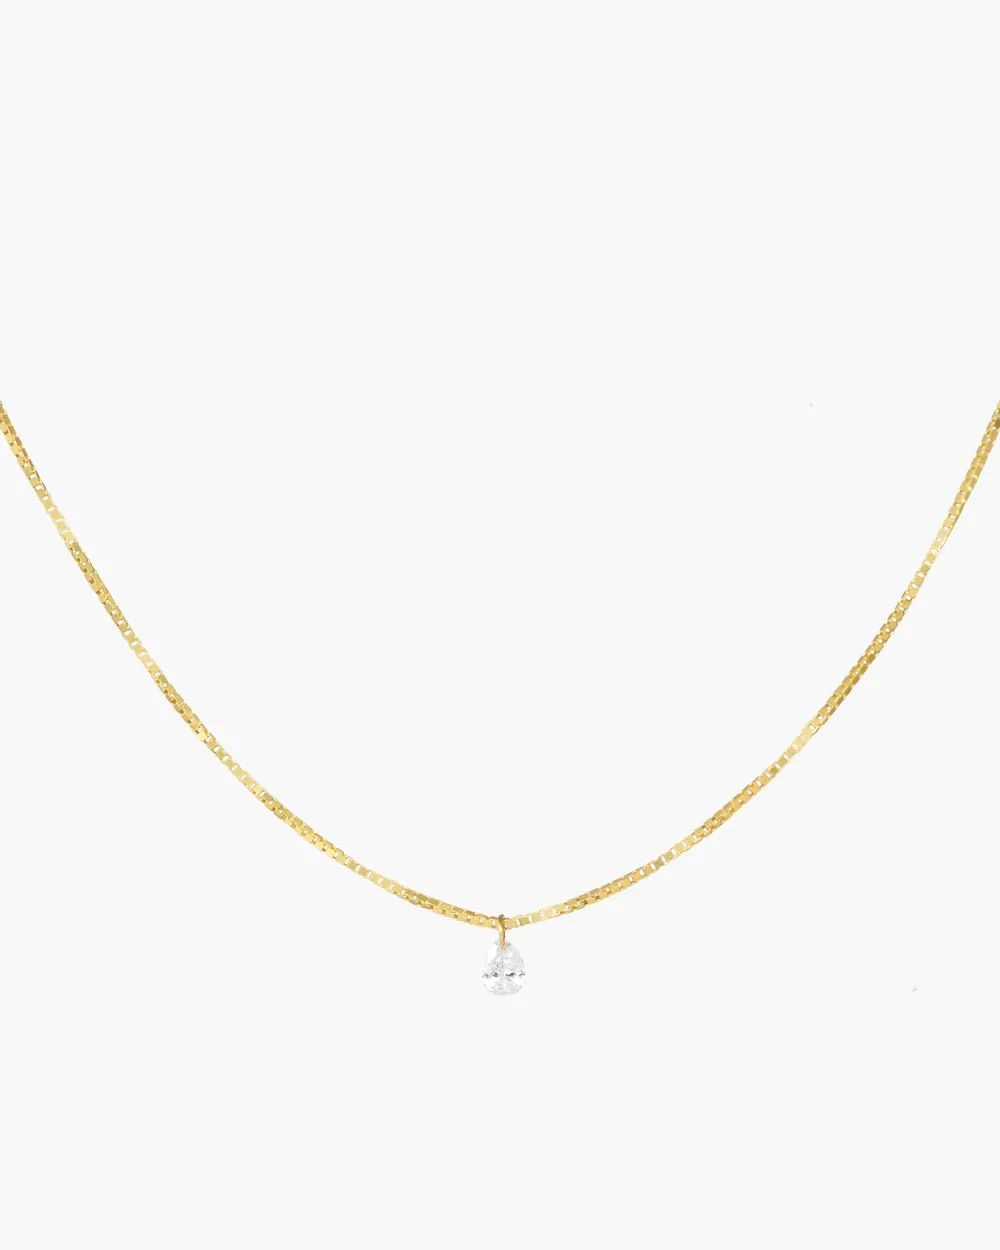 cypress box chain floating diamond necklace | Cupcakes and Cashmere